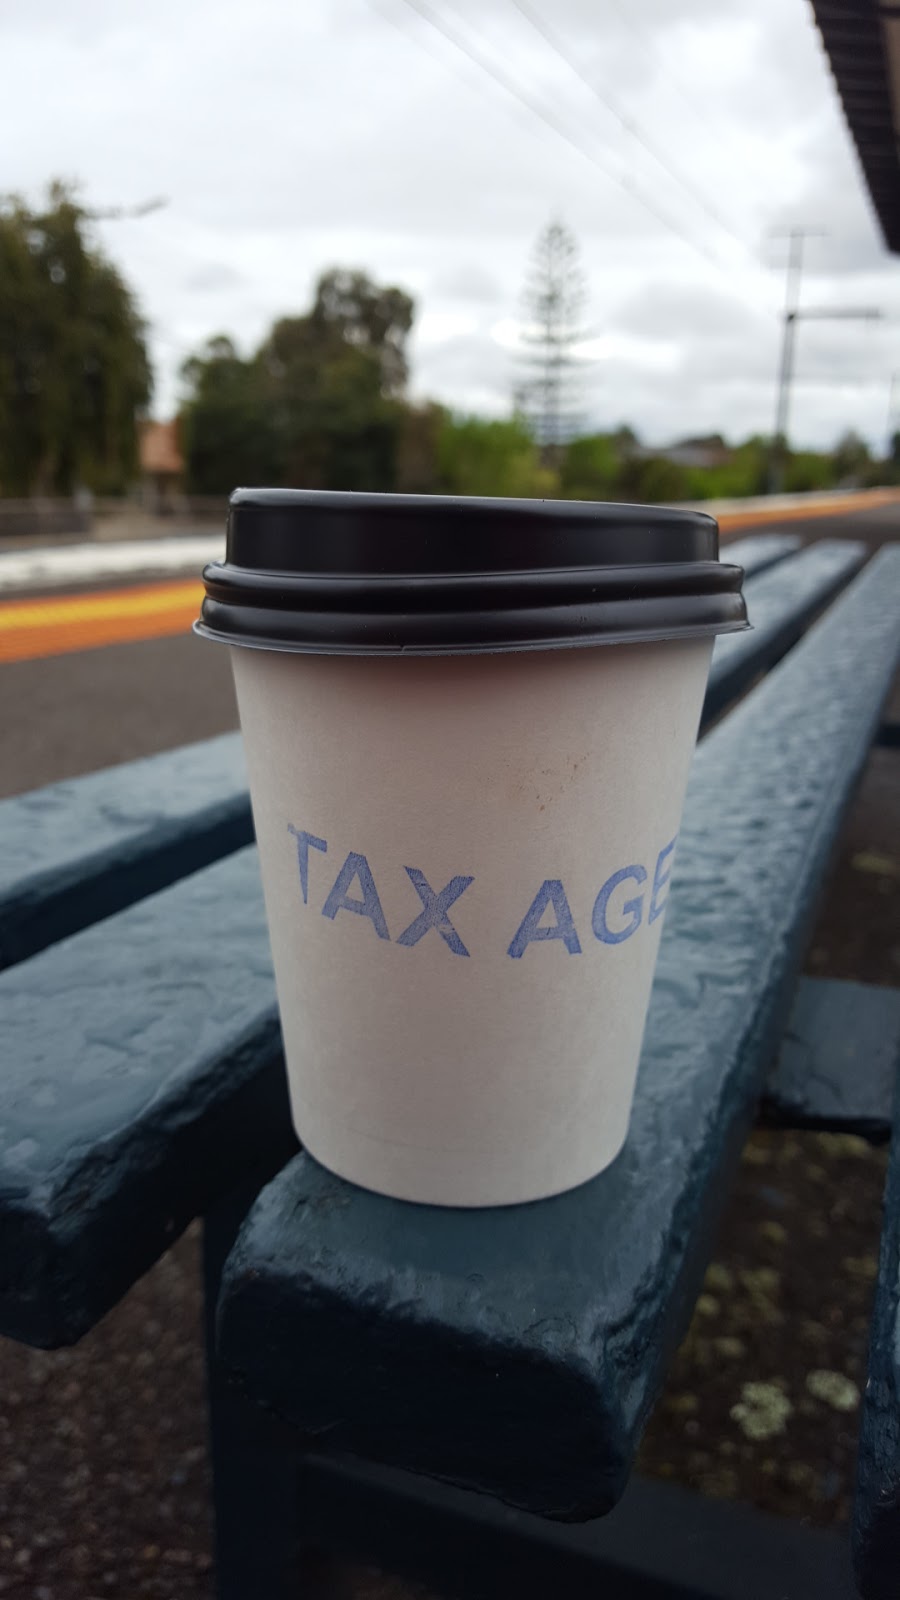 Tax Agent Espresso | cafe | Patterson Rd, Bentleigh VIC 3204, Australia